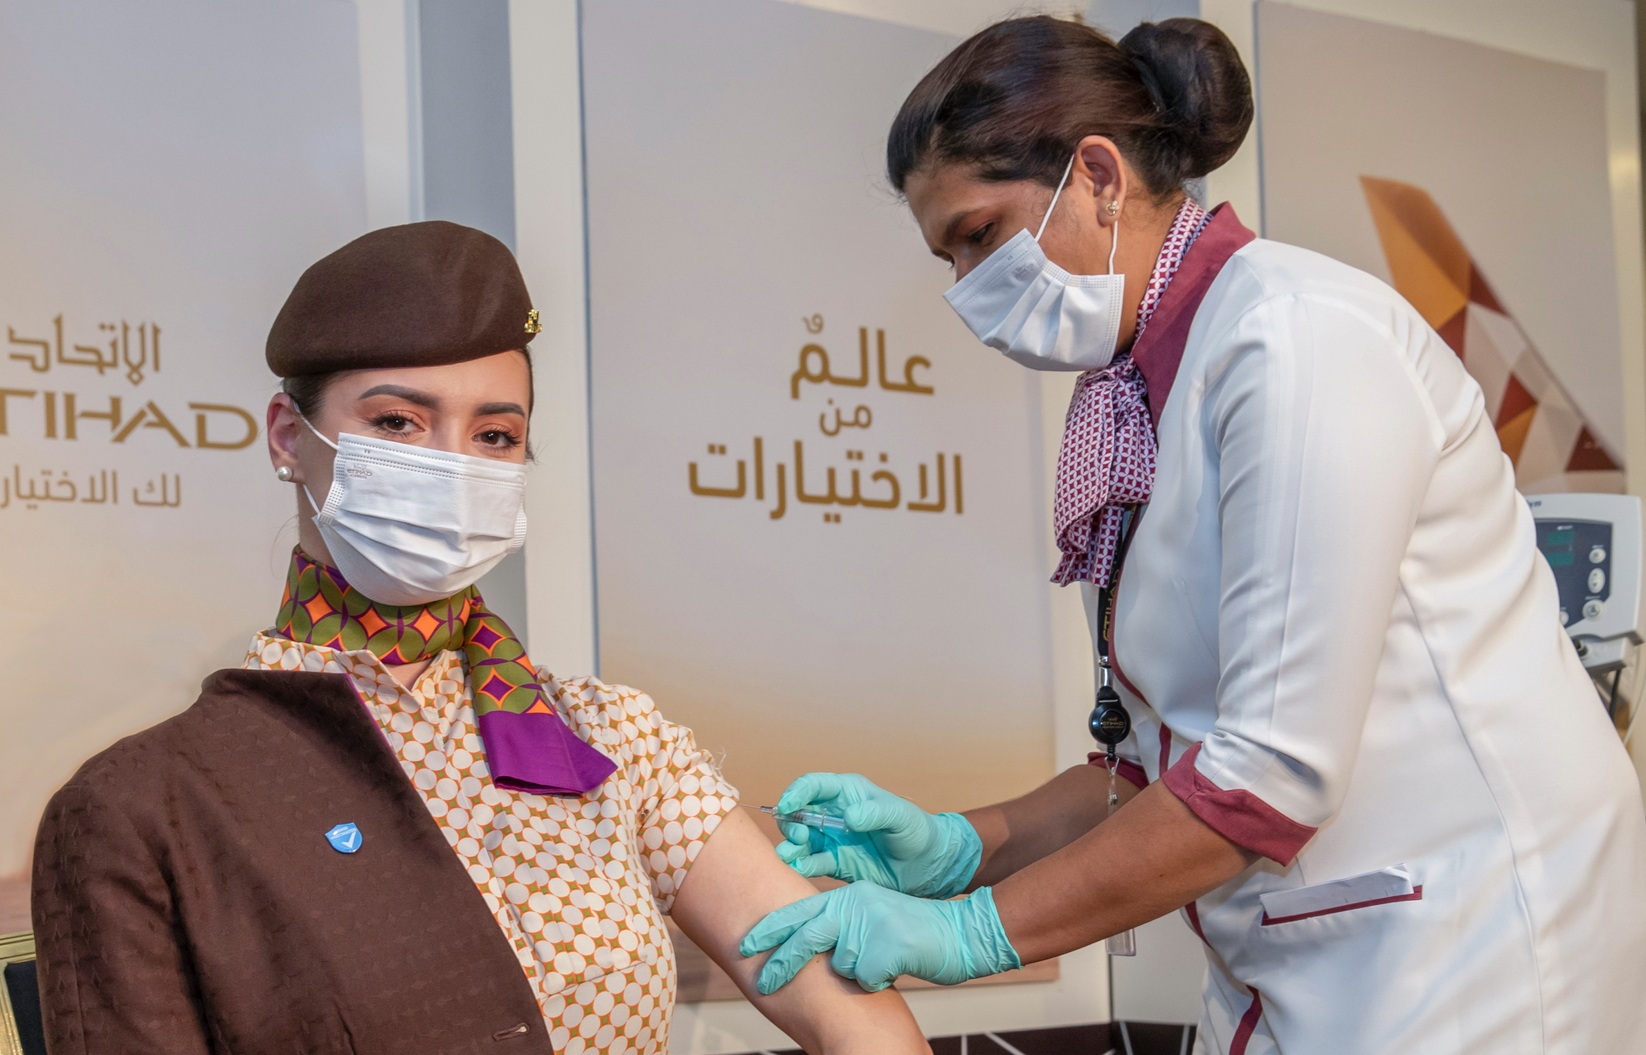 Etihad Airways, the national airline of the United Arab Emirates, has become the first airline in the world to have vaccinated all its operating pilots and cabin crew against COVID19. Click to enlarge.